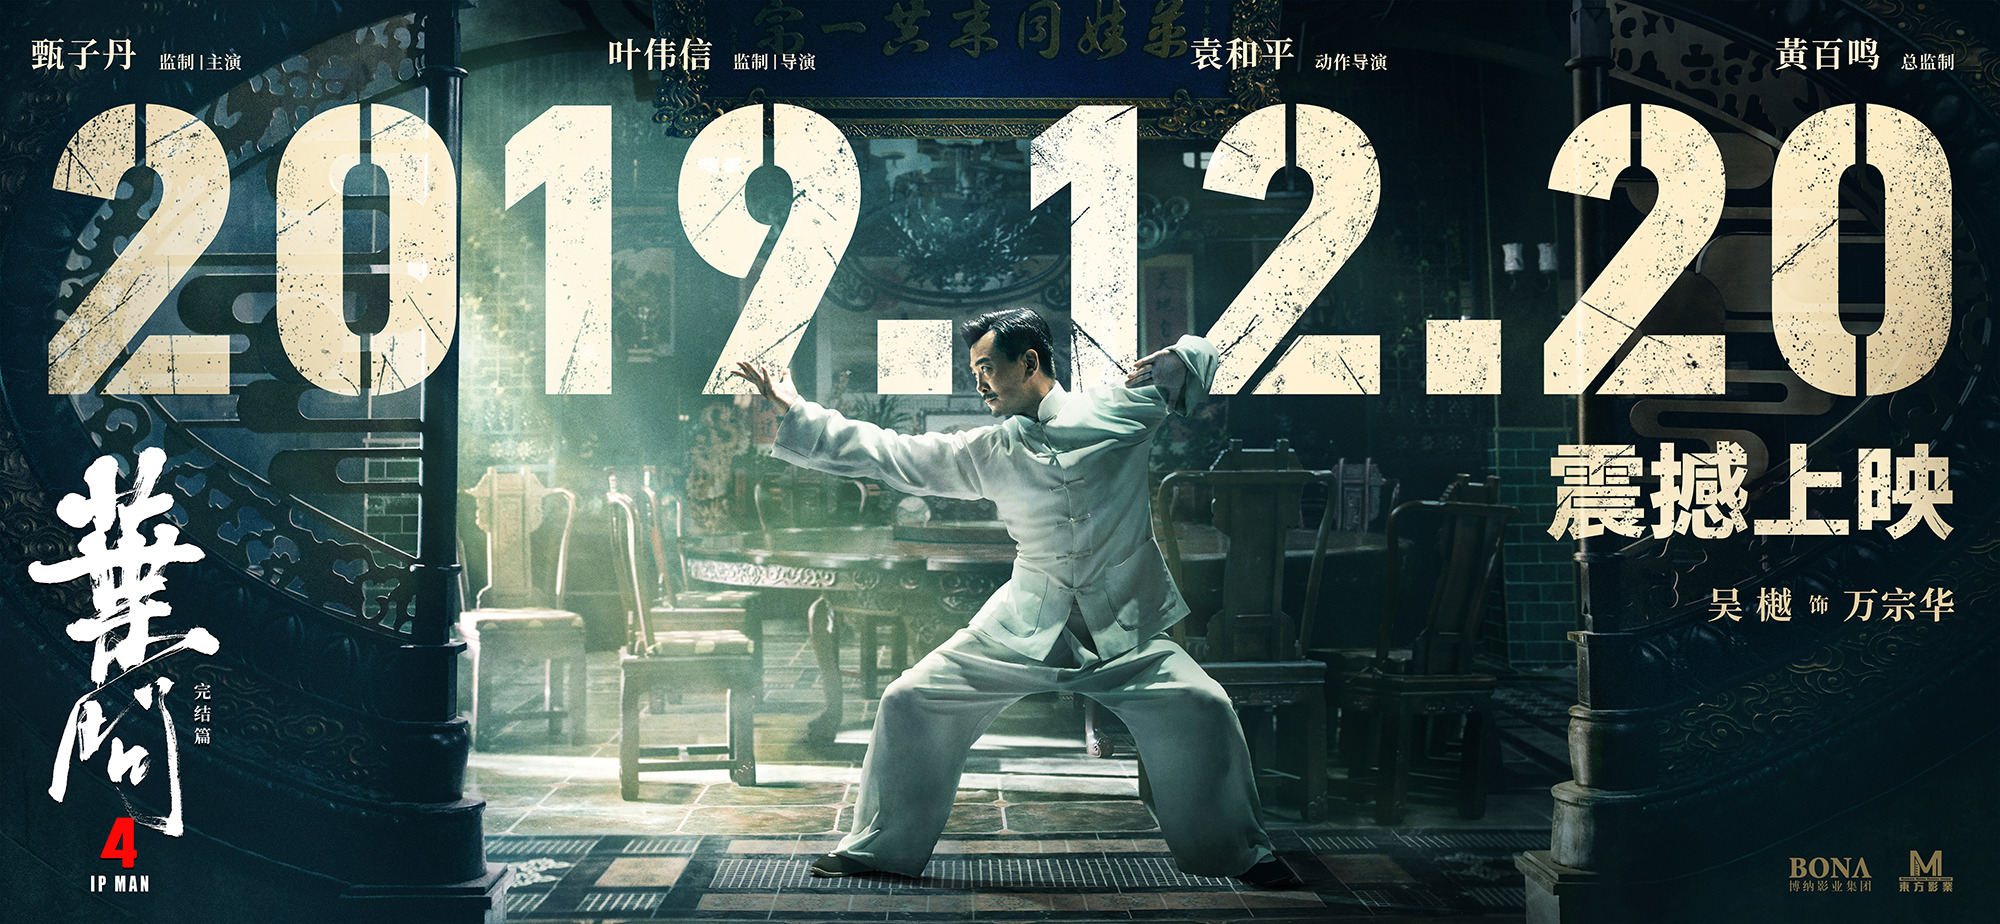 Mega Sized Movie Poster Image for Yip Man 4 (#5 of 15)